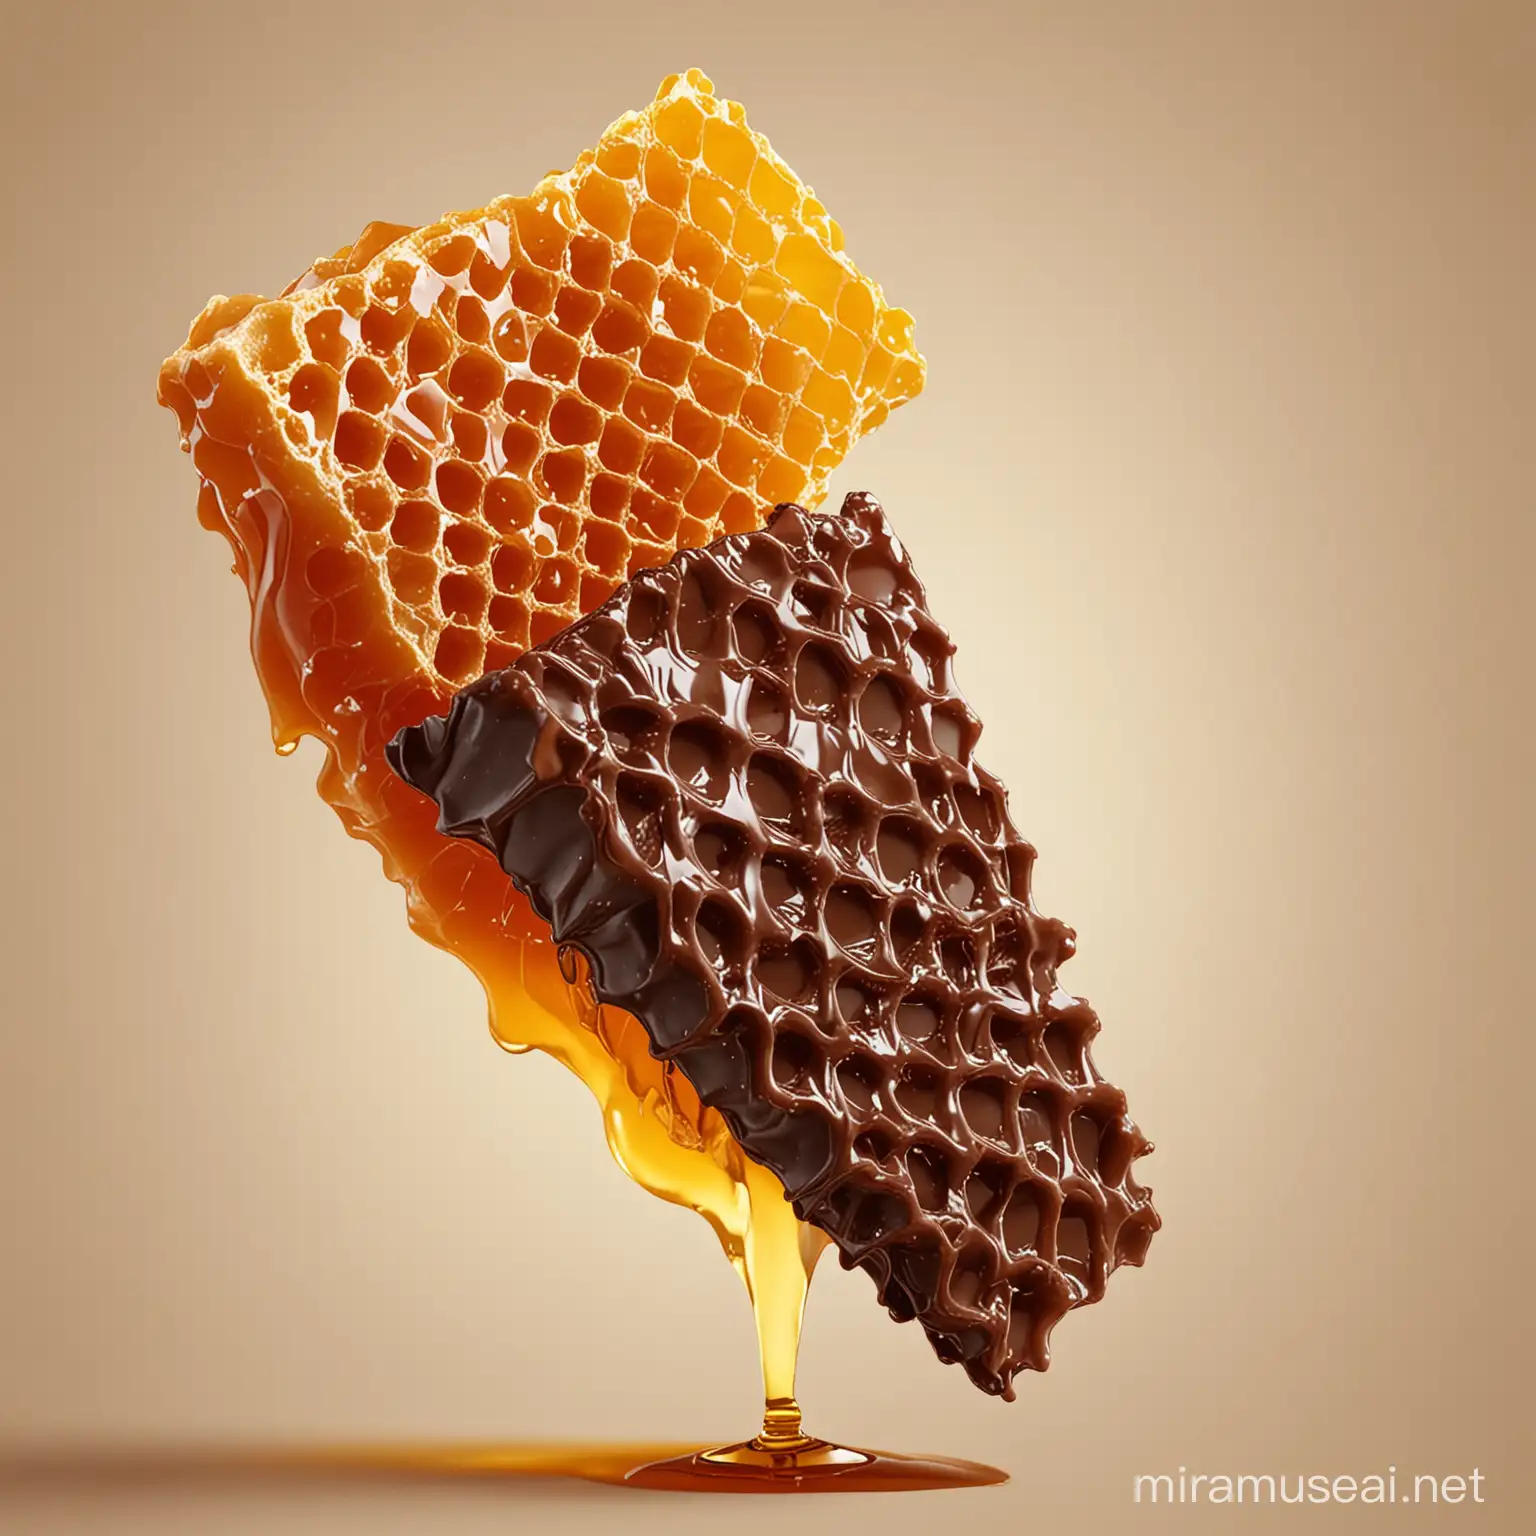 piece of honeycomb dipped chocolate and honey running from the honeycomb, no background